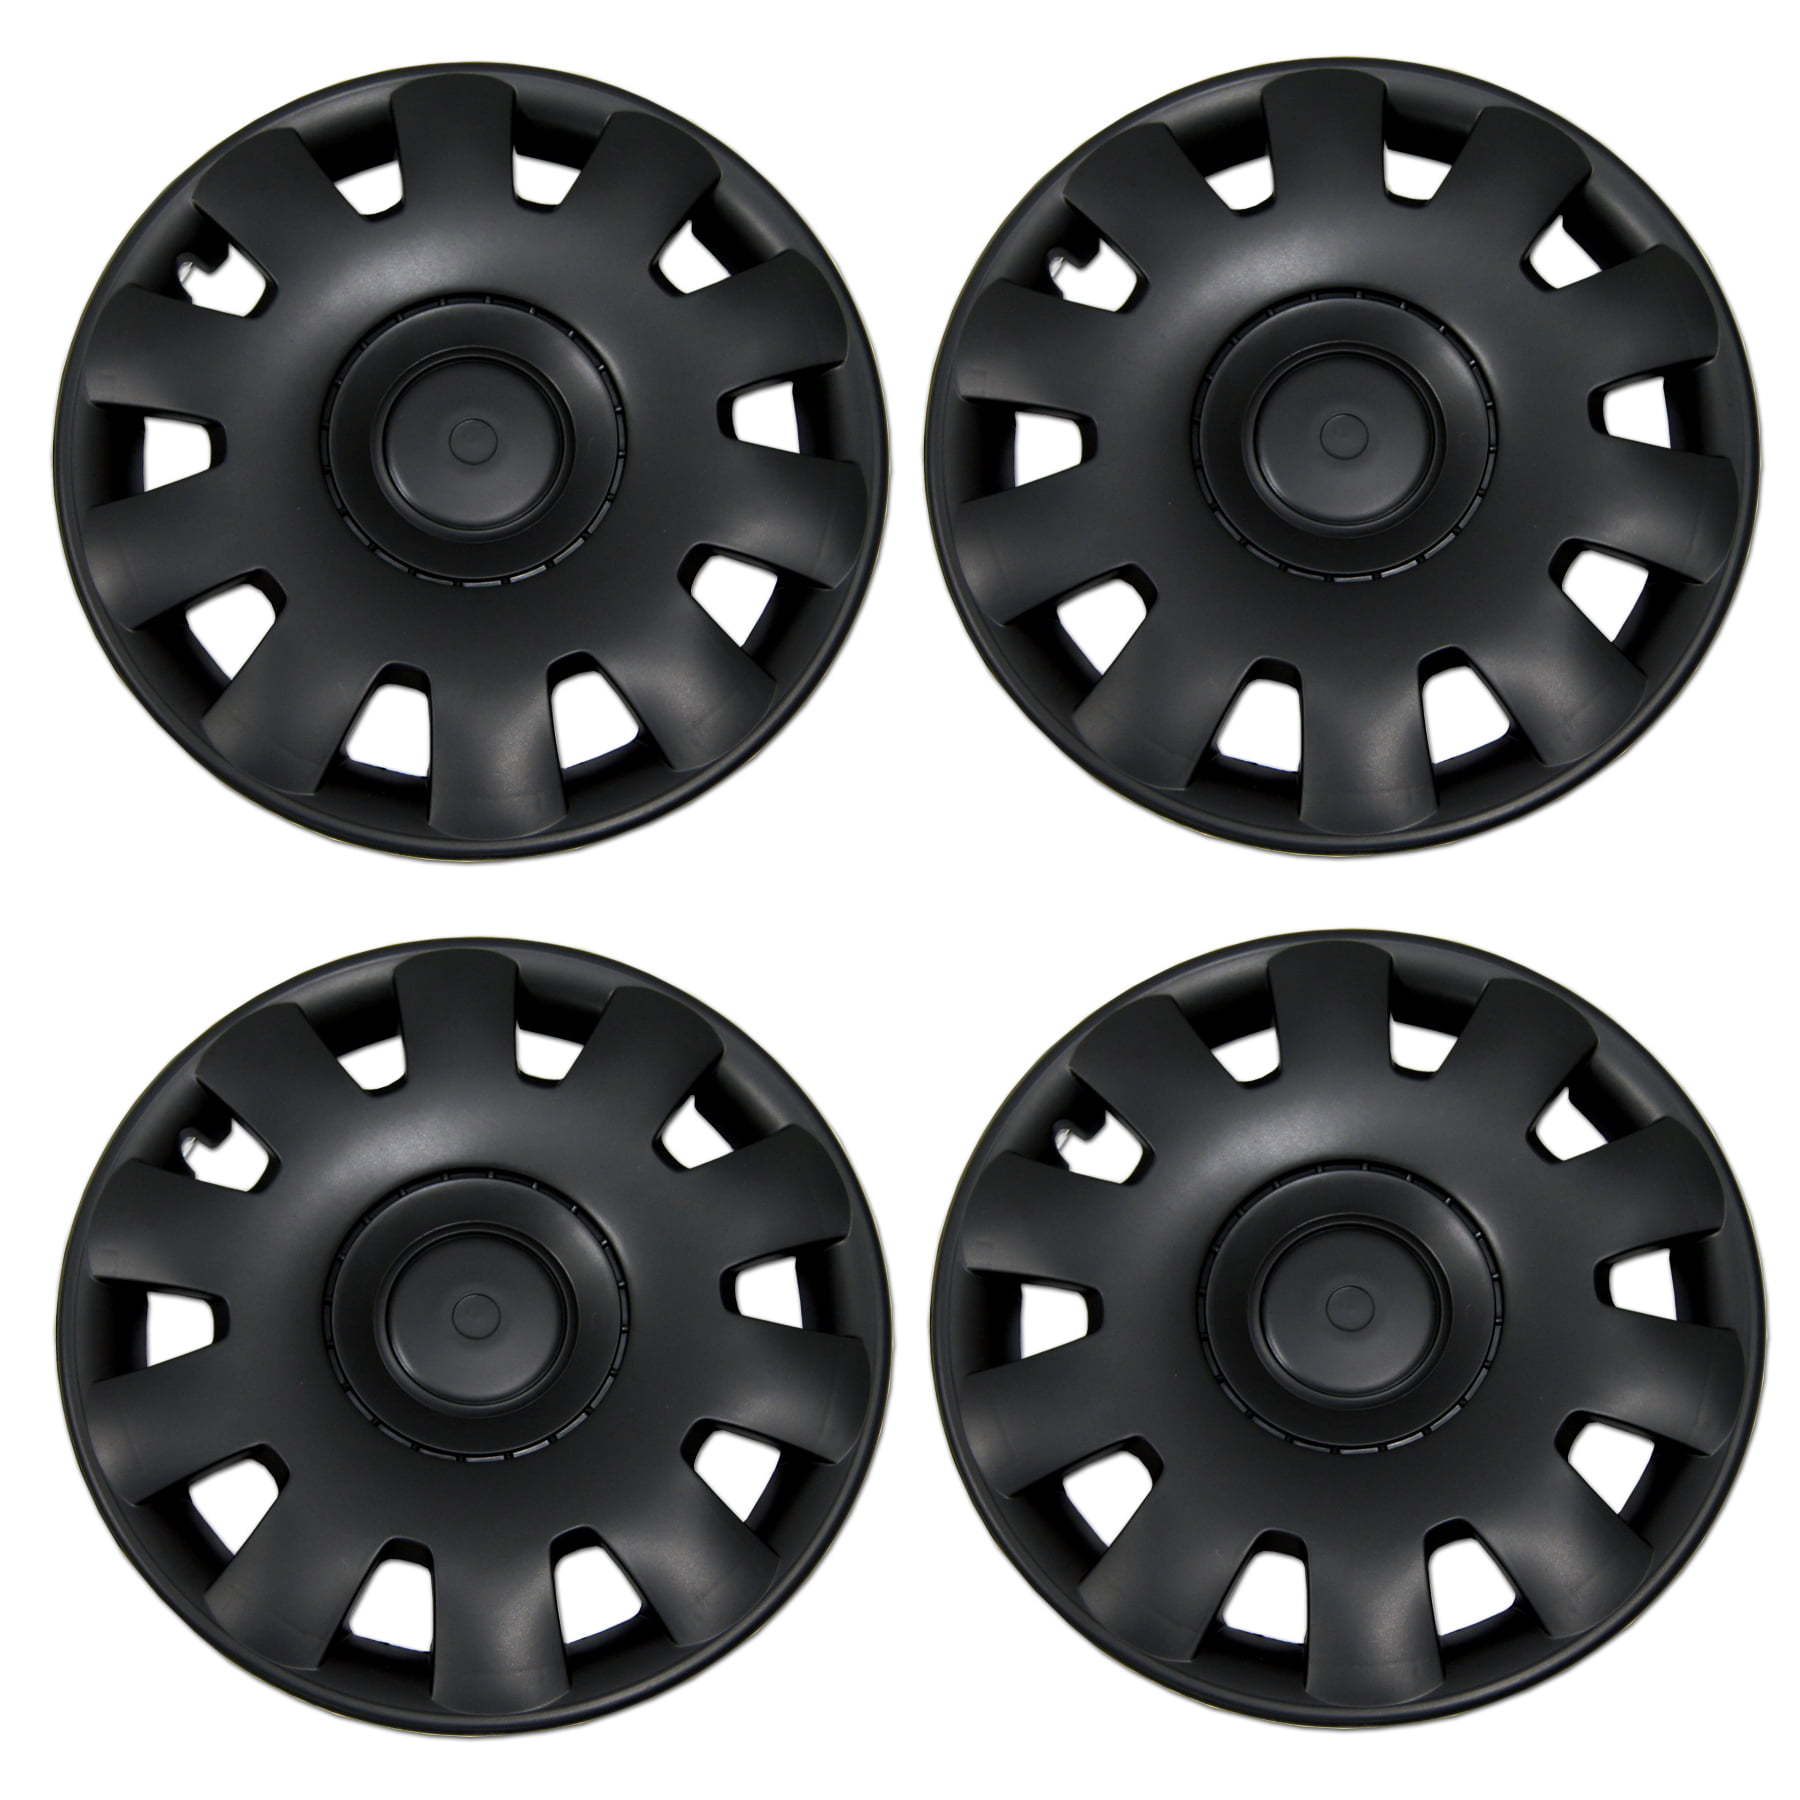 15-Inches Matte Black Hubcaps Wheel Cover Pop-On TuningPros WSC3-032B15 4pcs Set Snap-On Type 